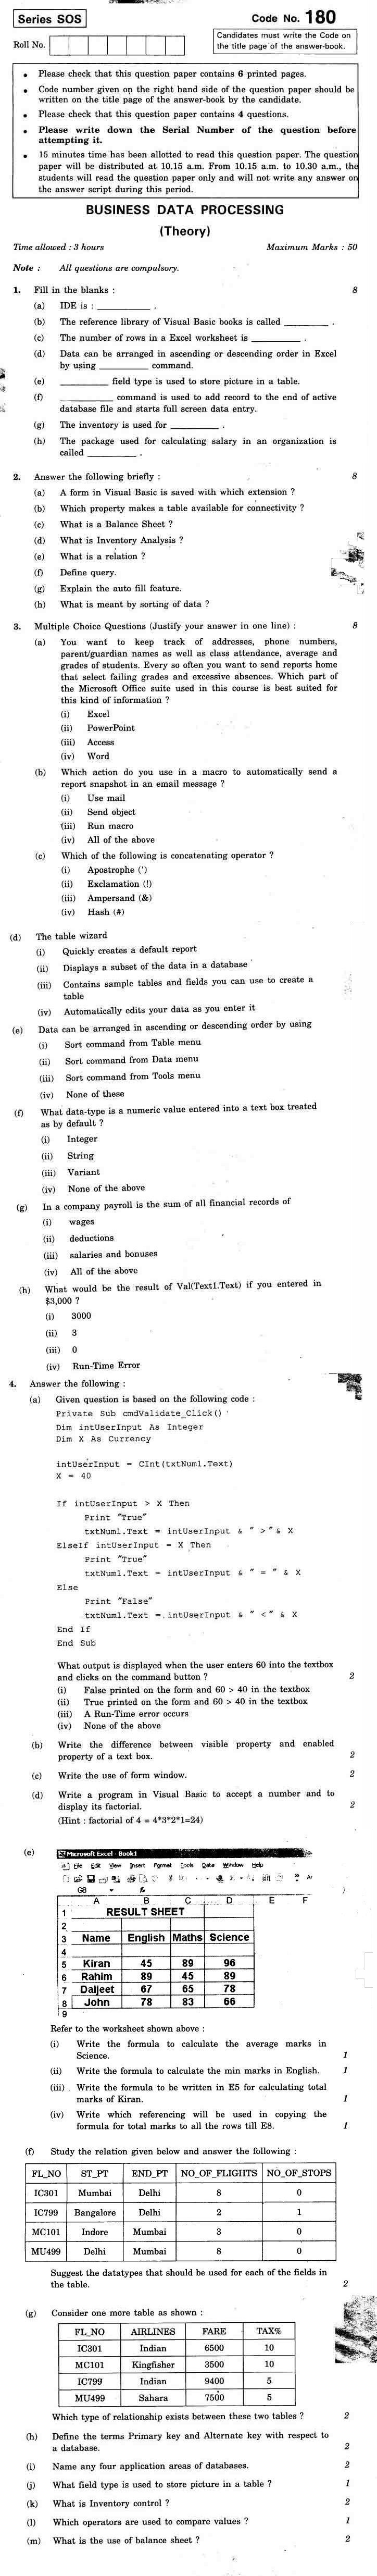 CBSE Class XII Previous Year Question Papers 2011 Business Data Processing